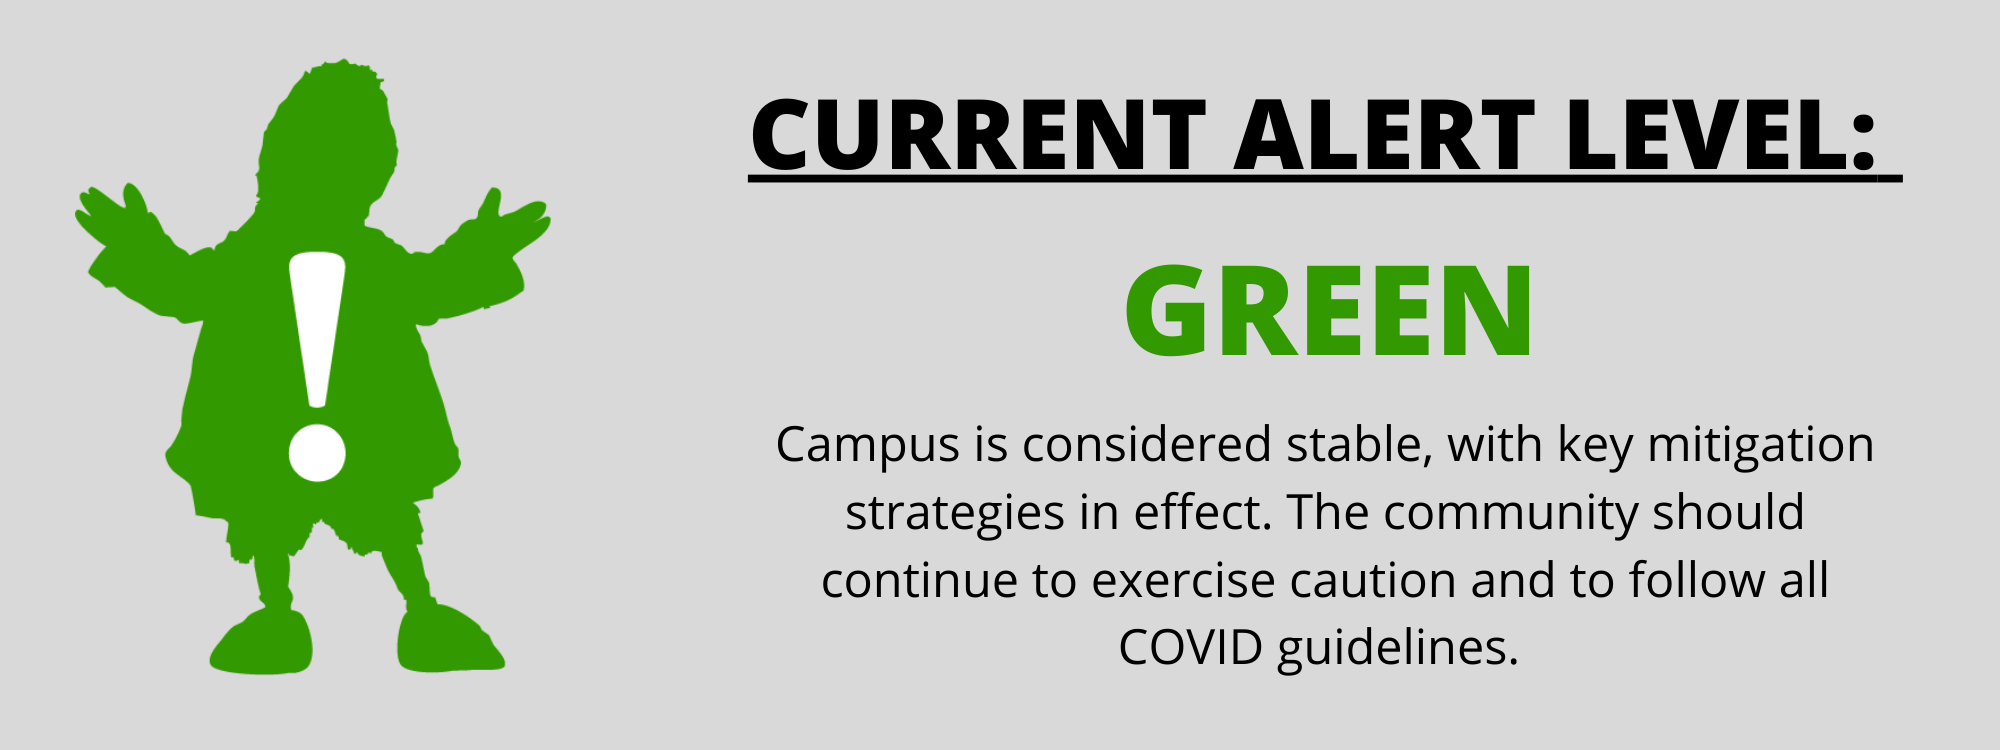 Current Alert Level is Green